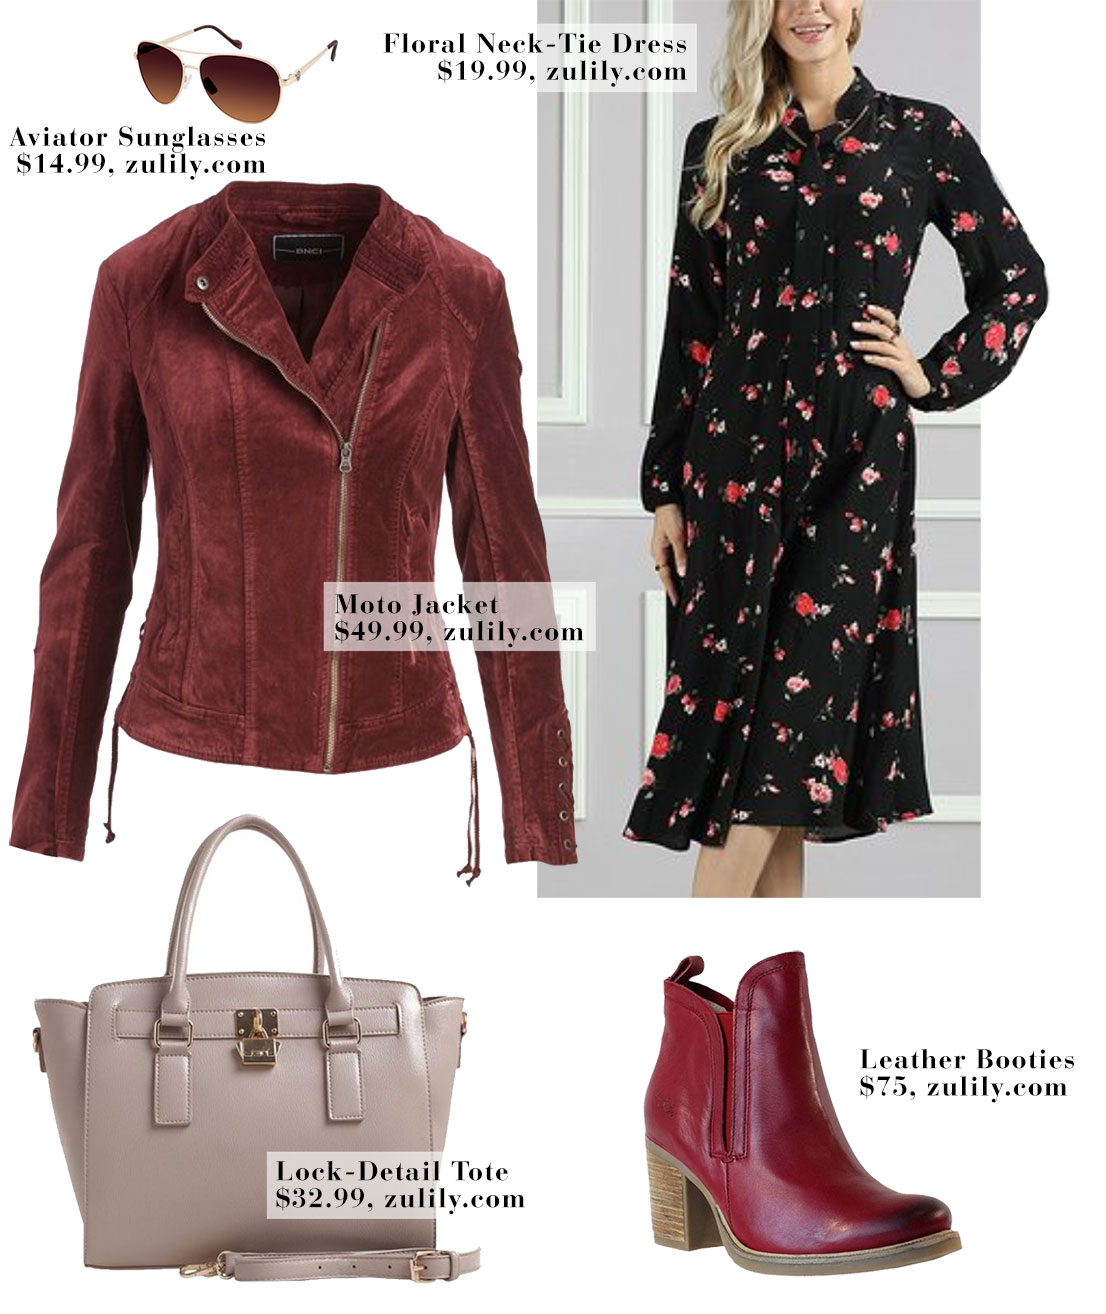 Jessica Biel wears a floral dress with a burgundy red moto jacket and Chanel lace up booties.